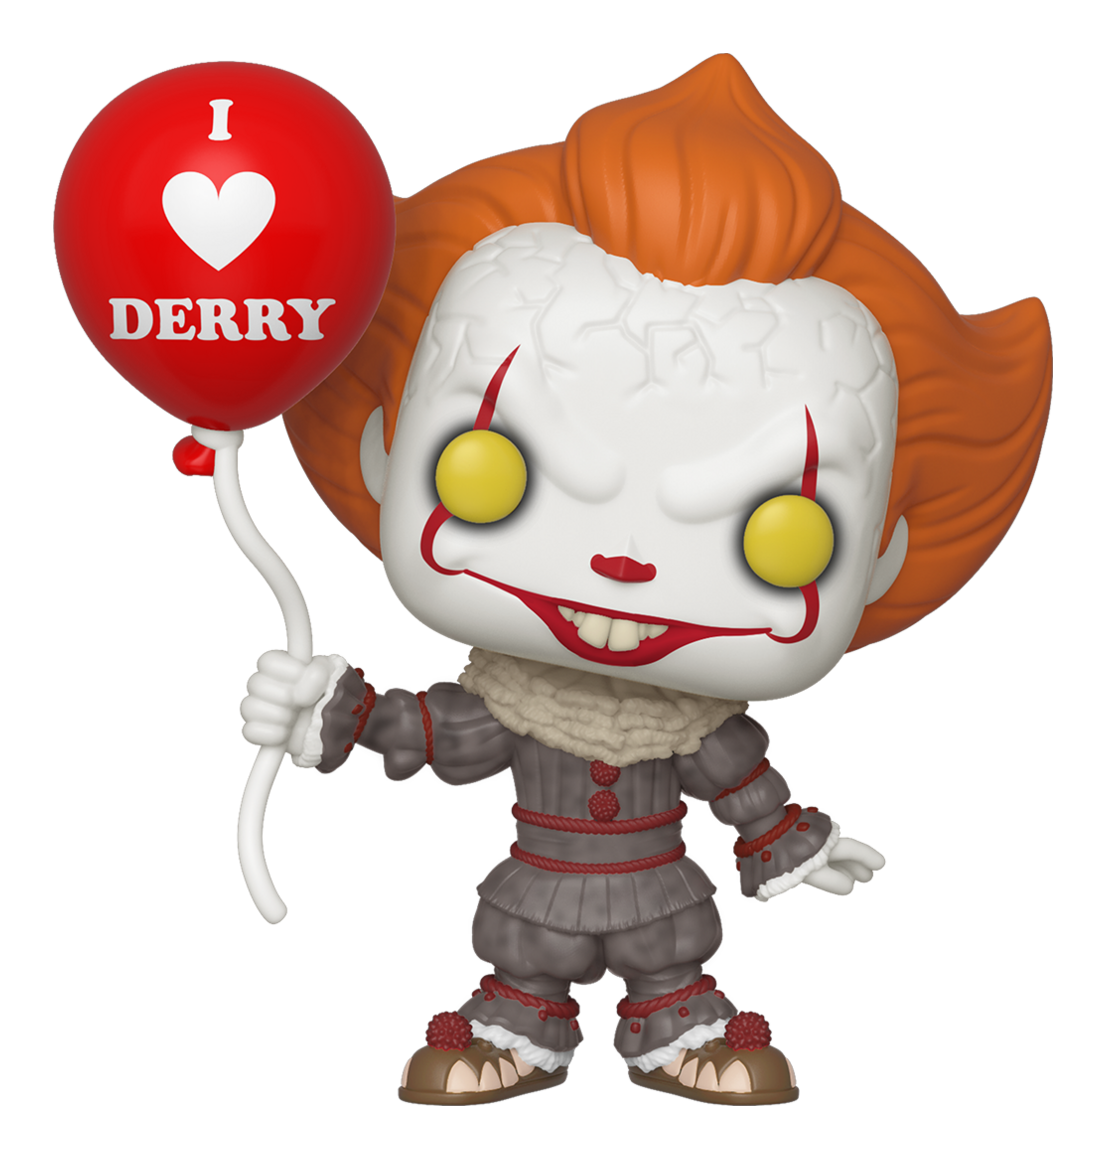 Funko Pop Movies | IT Chapter Two | Pennywise with Balloon #780